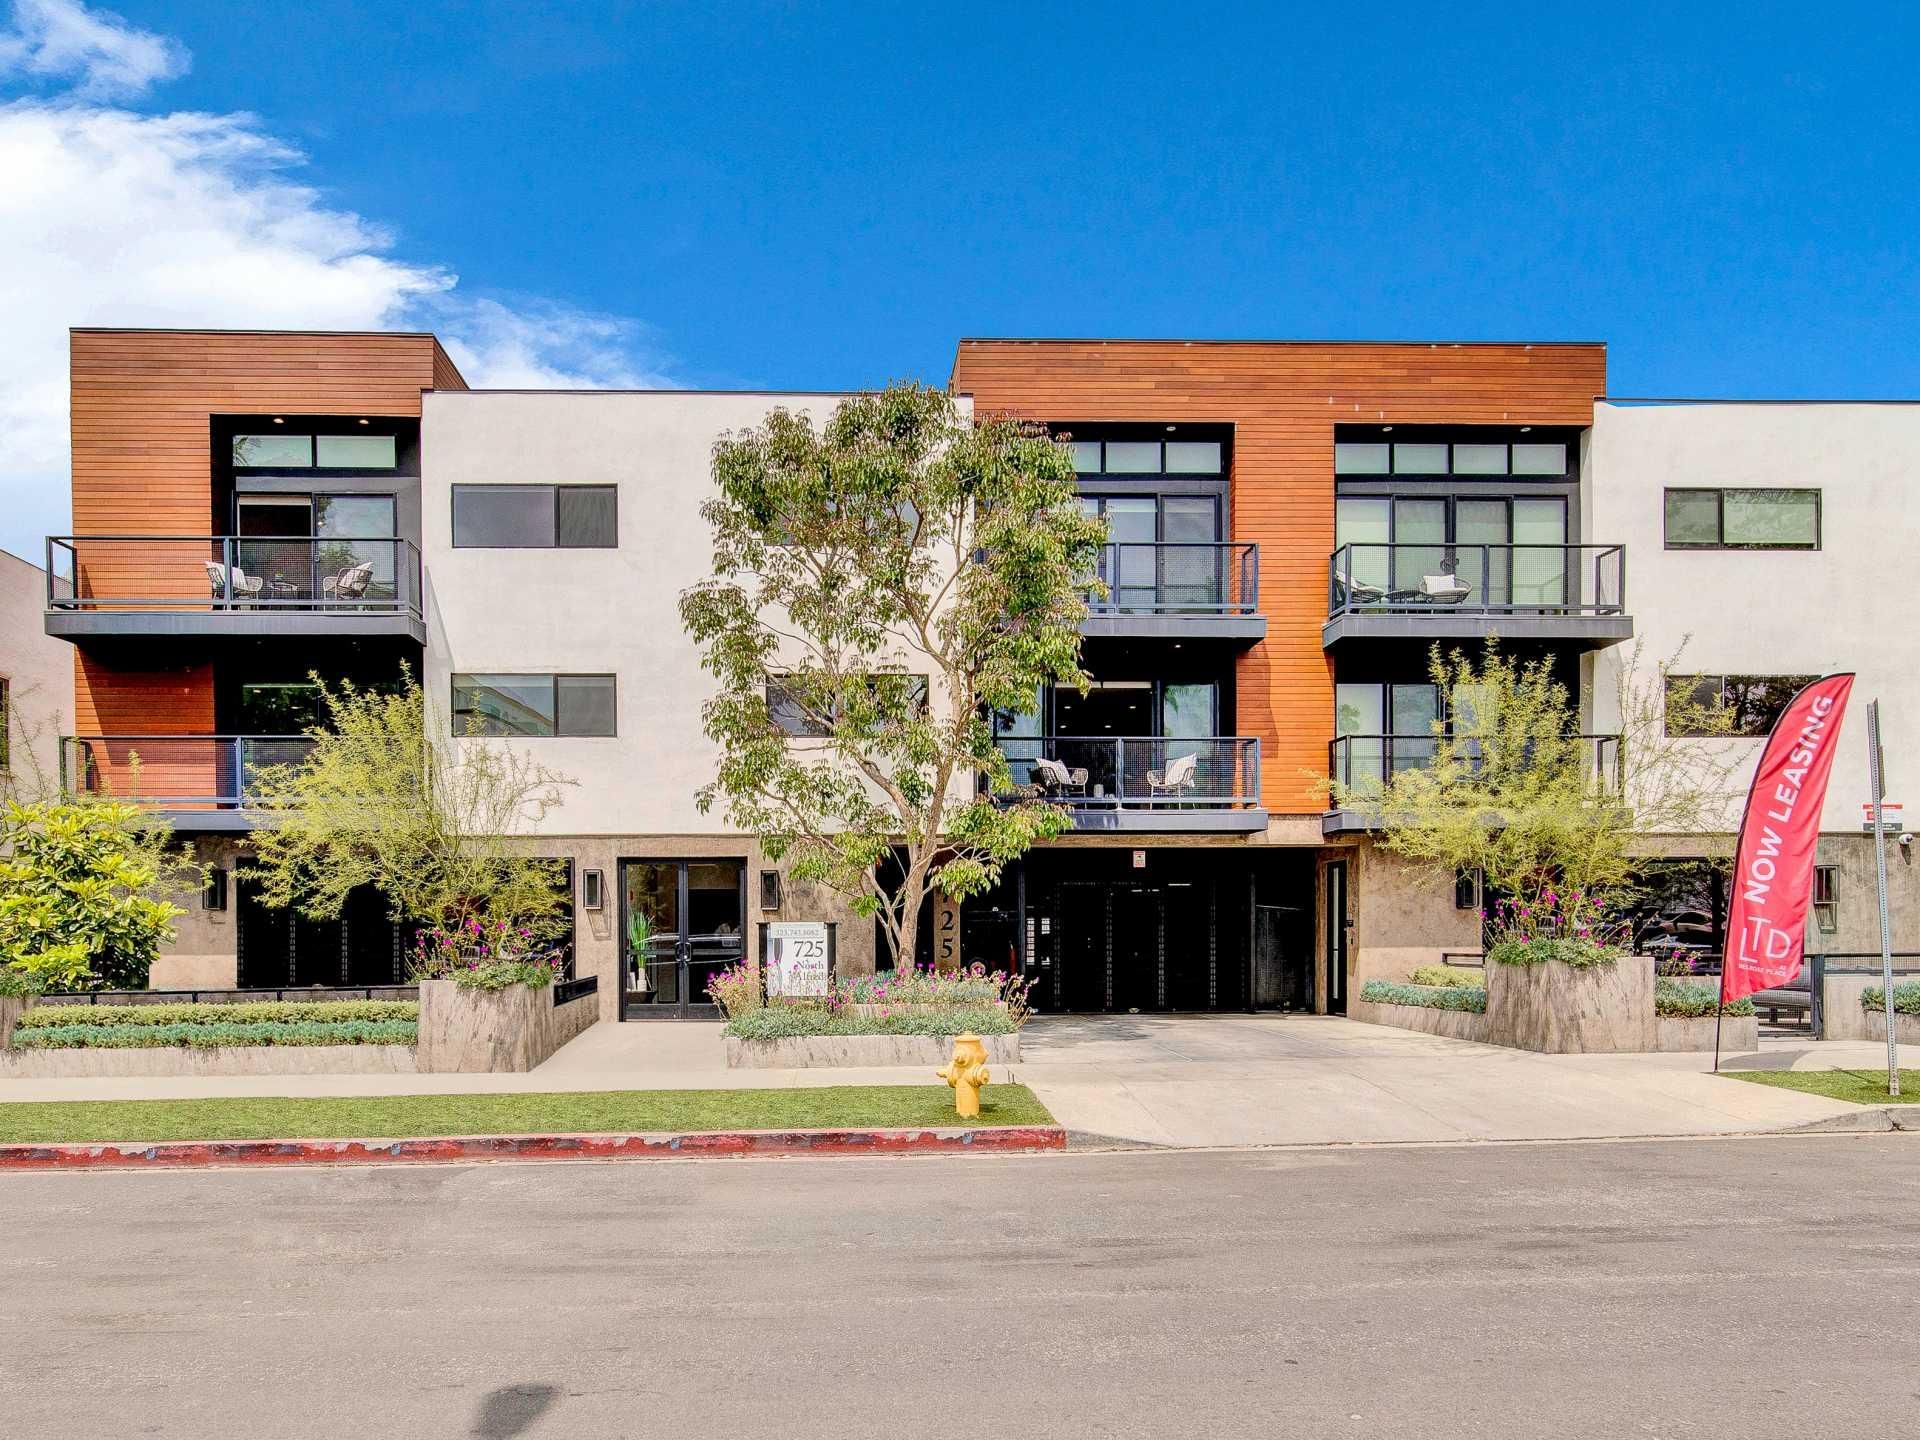 9000 W Sunset Blvd, West Hollywood, CA 90069 - Office for Lease